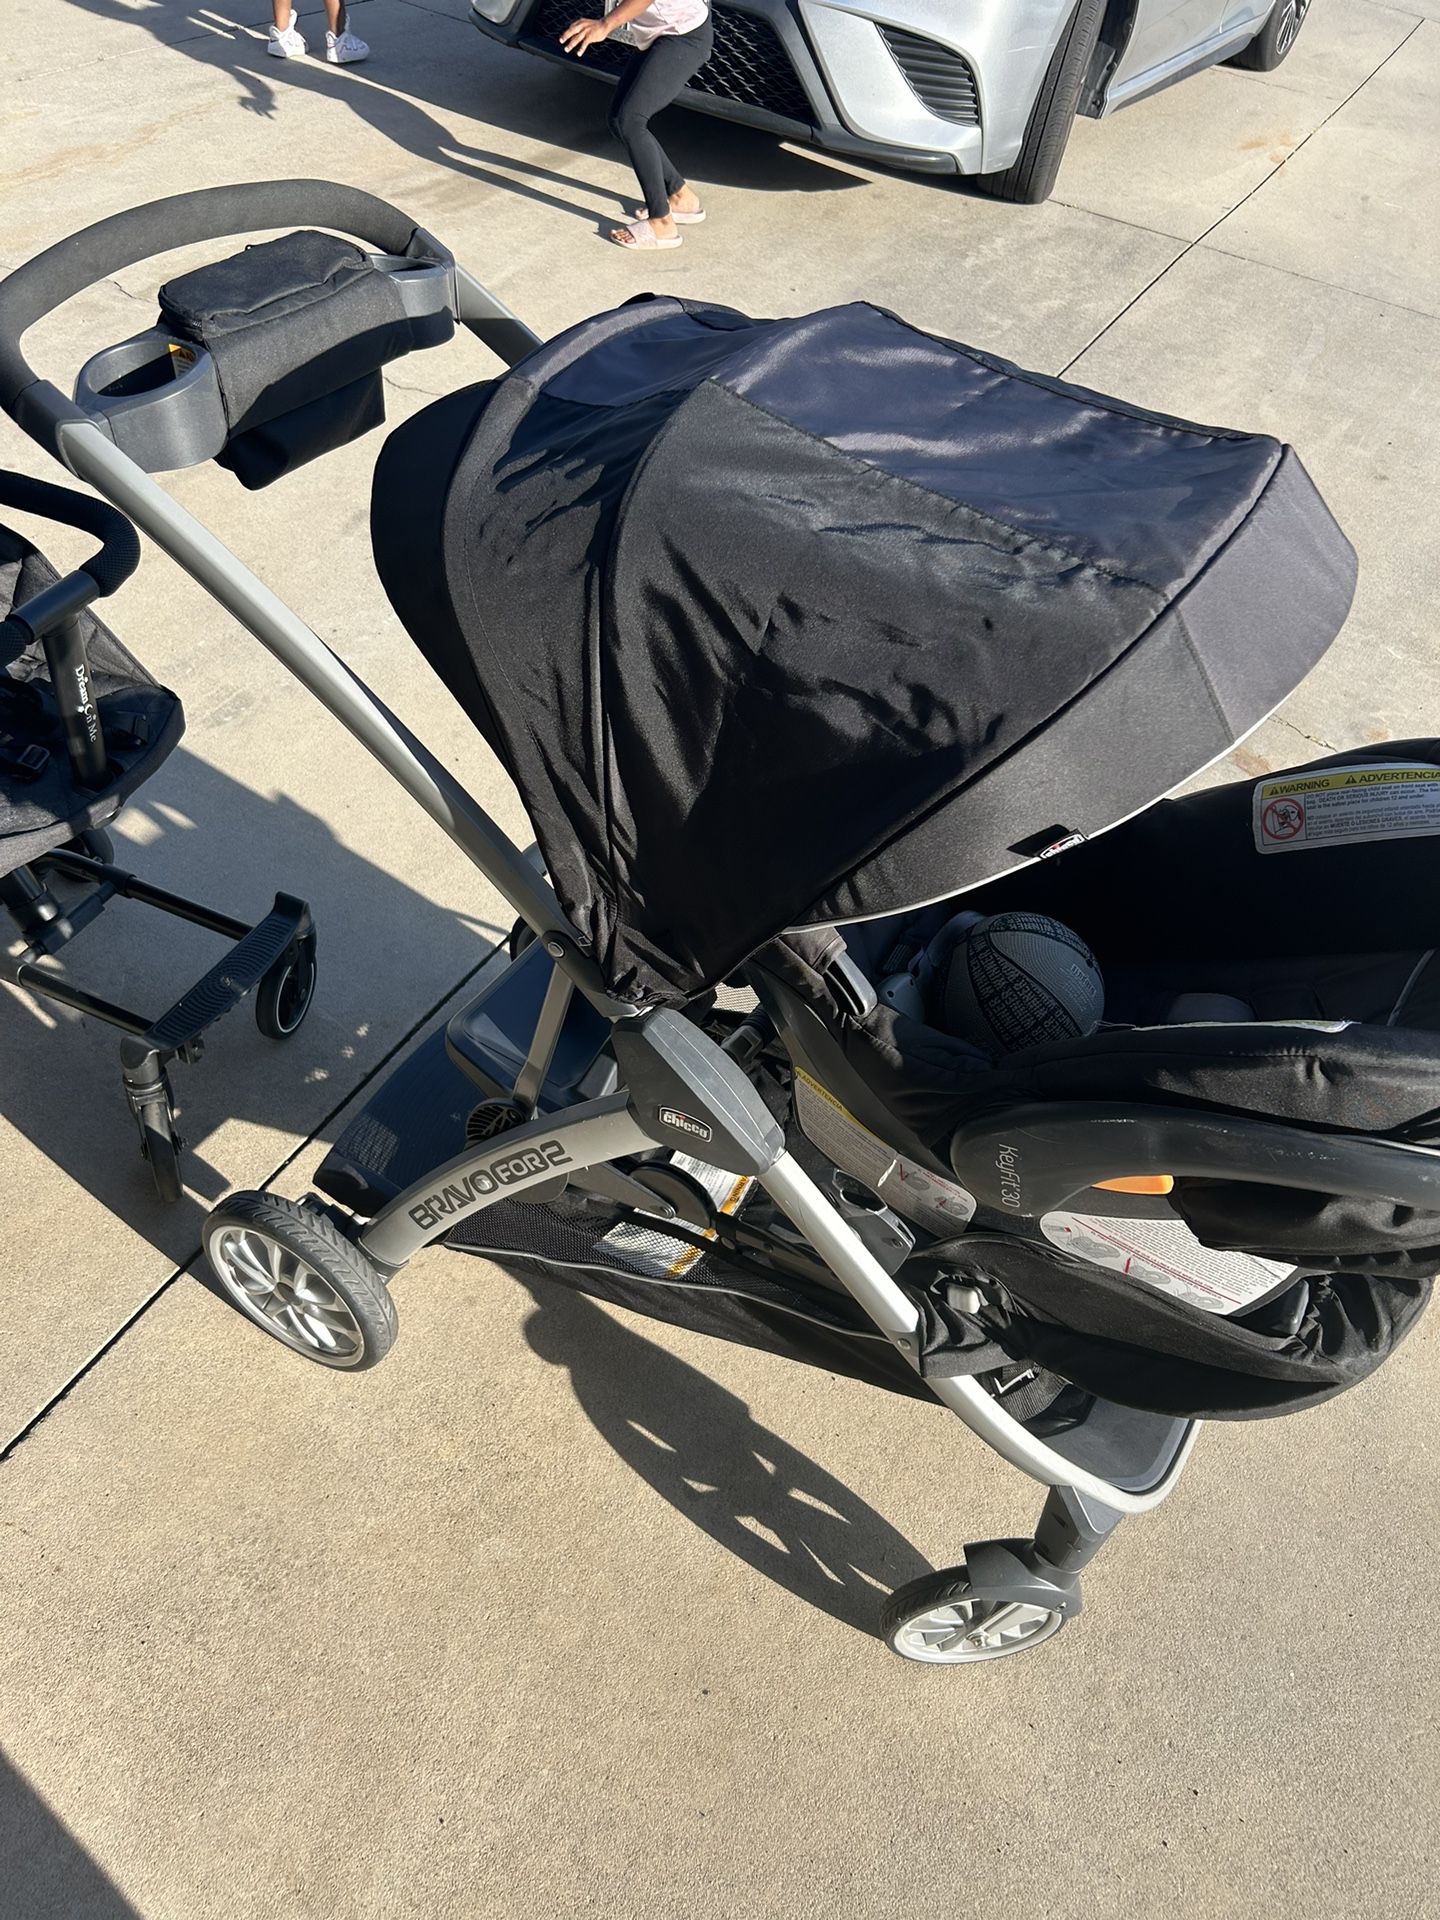 Stroller two seater